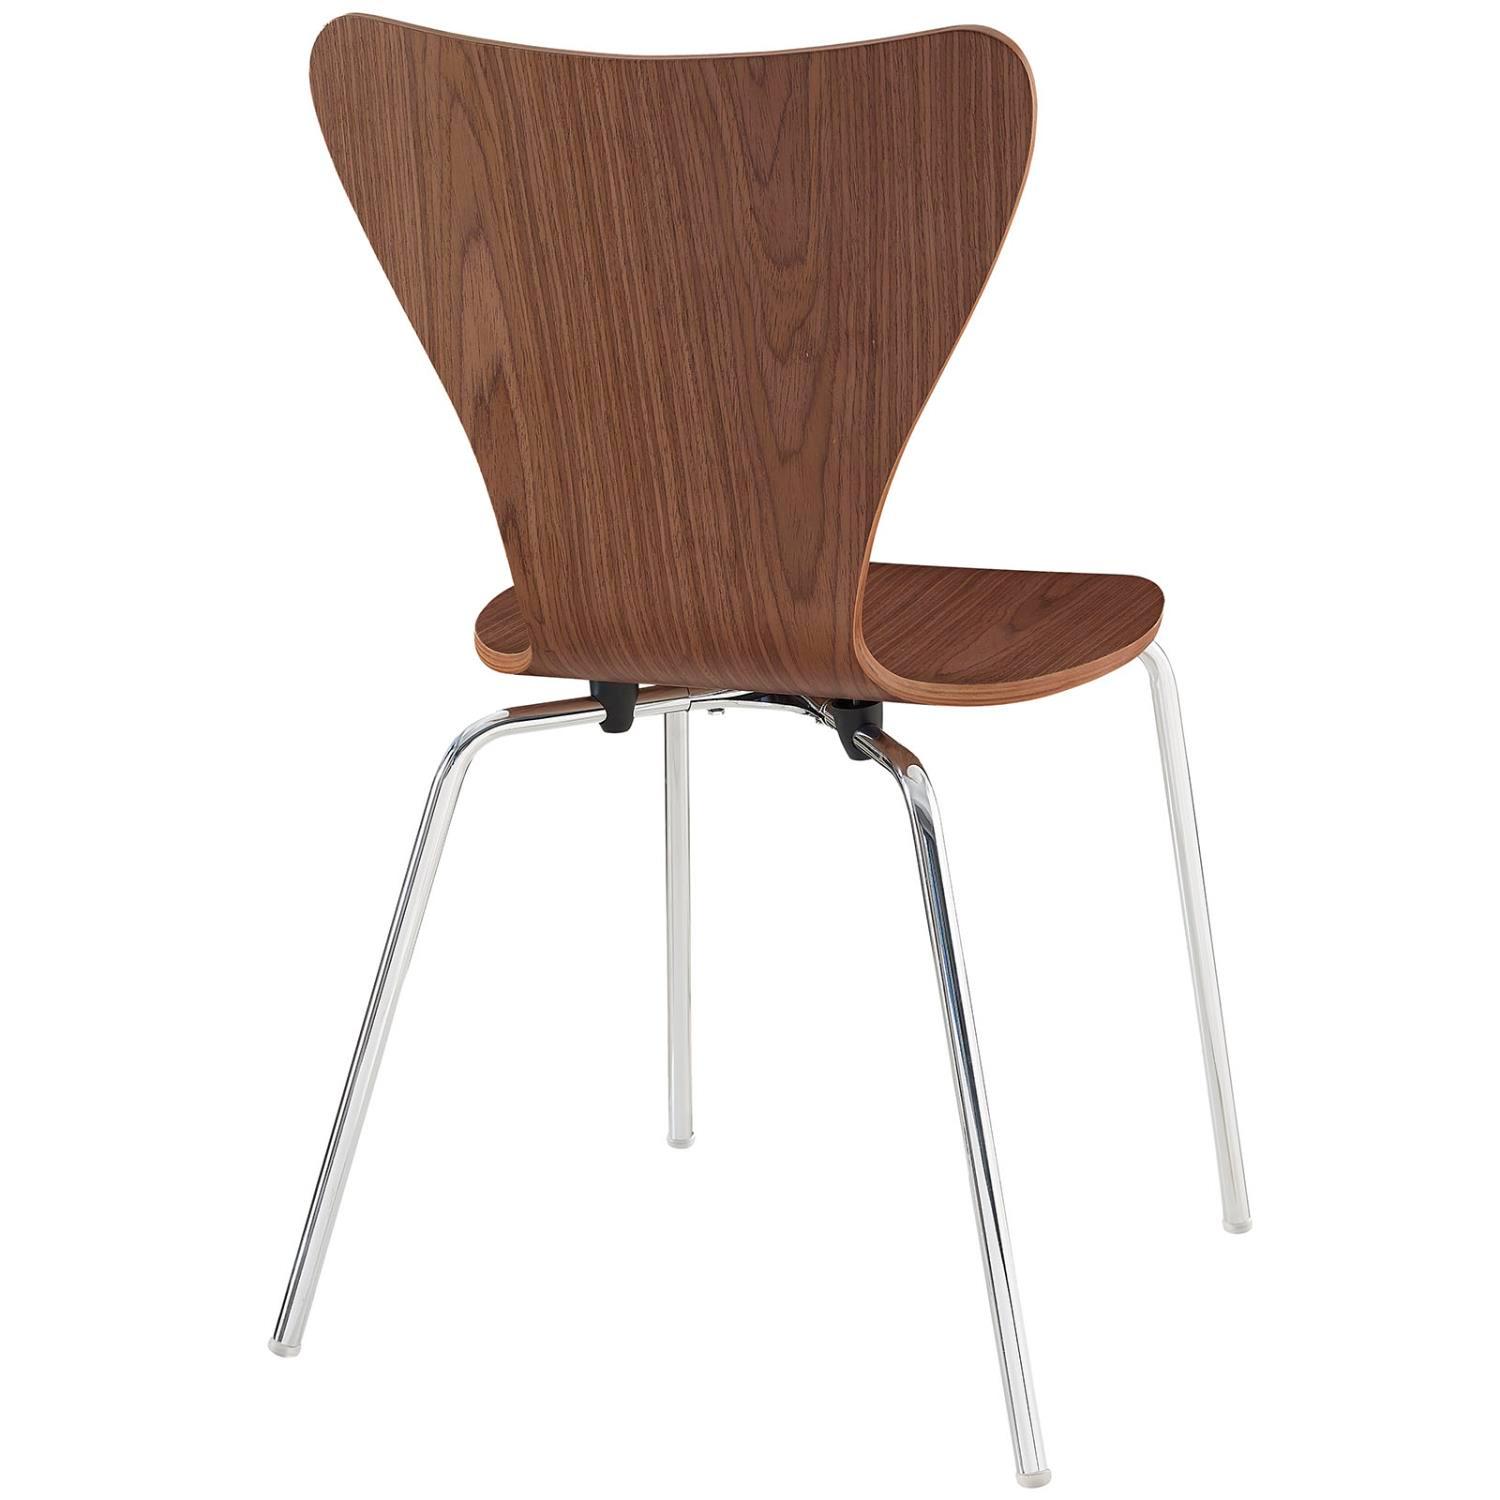 Modway Ernie Dining Side Chair With Walnut Finish EEI-537-WAL